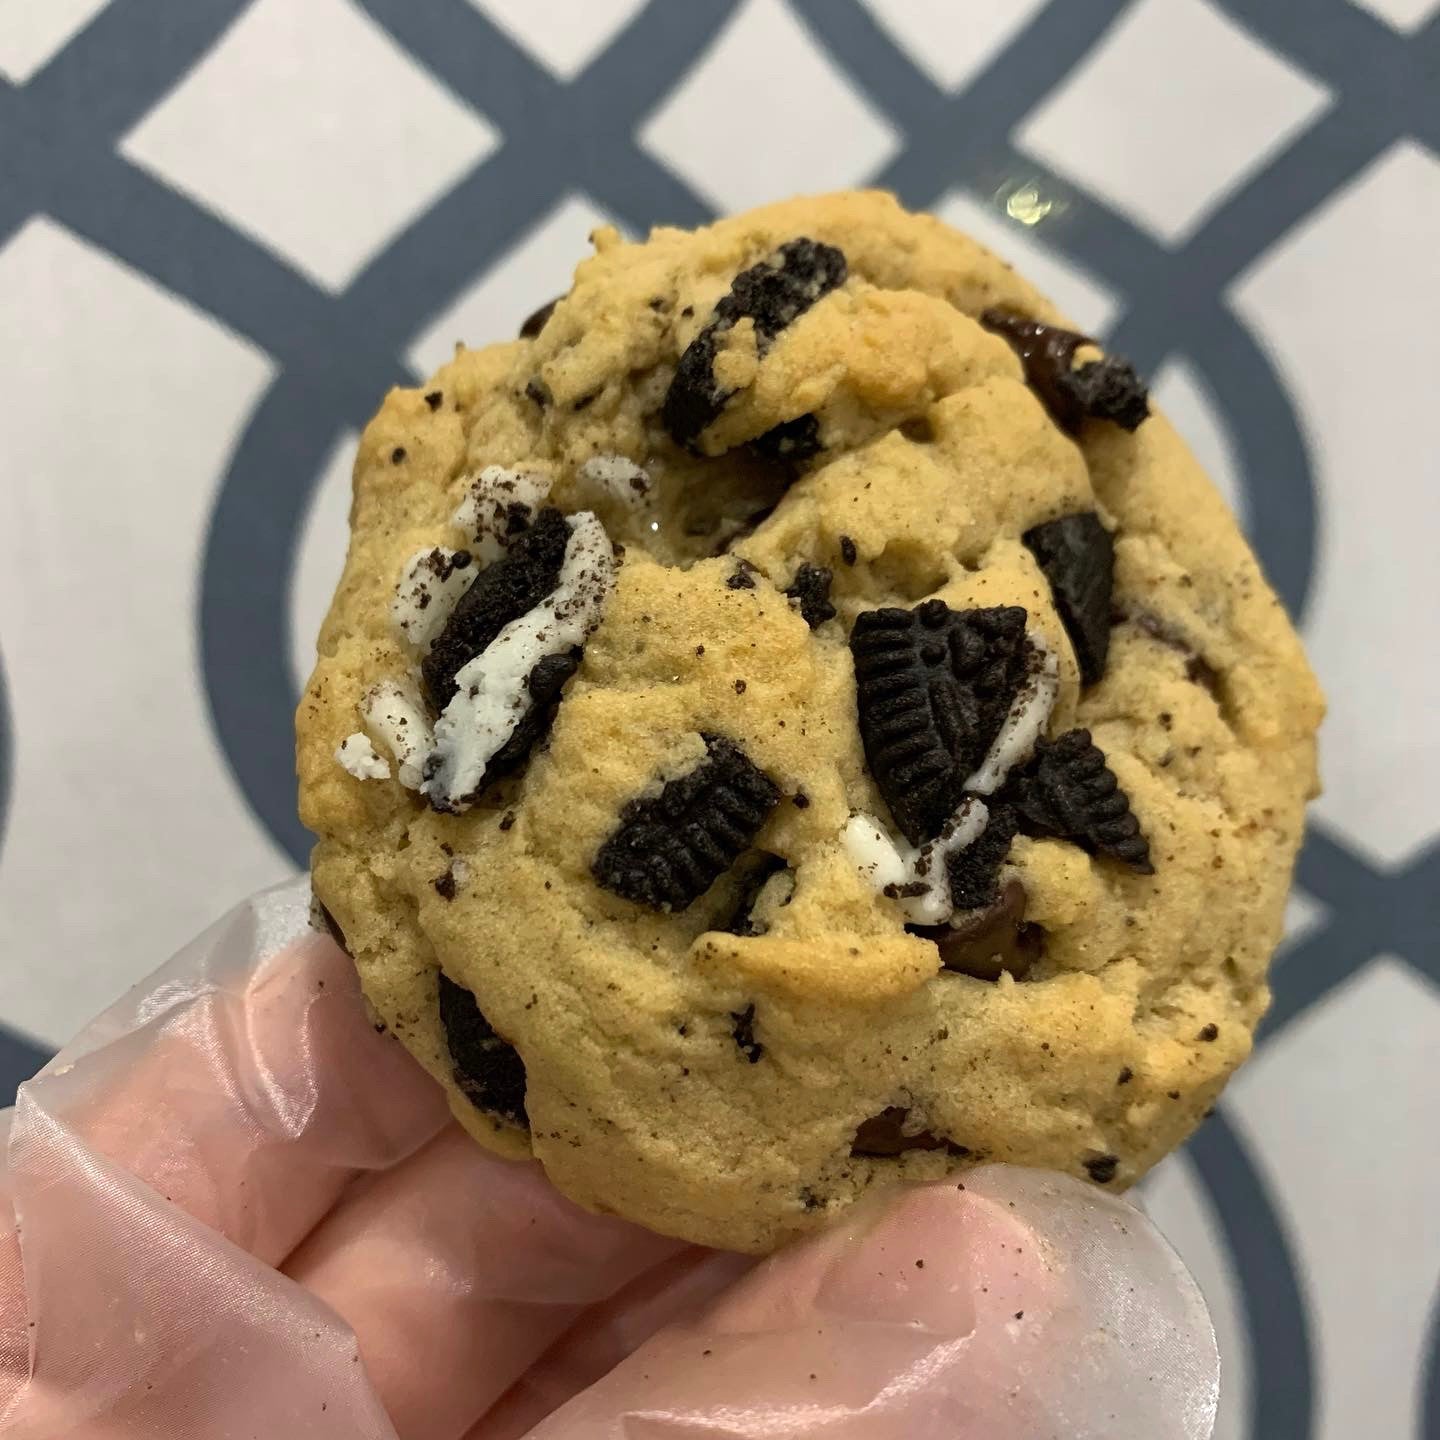 Oreo Chocolate Chip Cookie (5 pack)